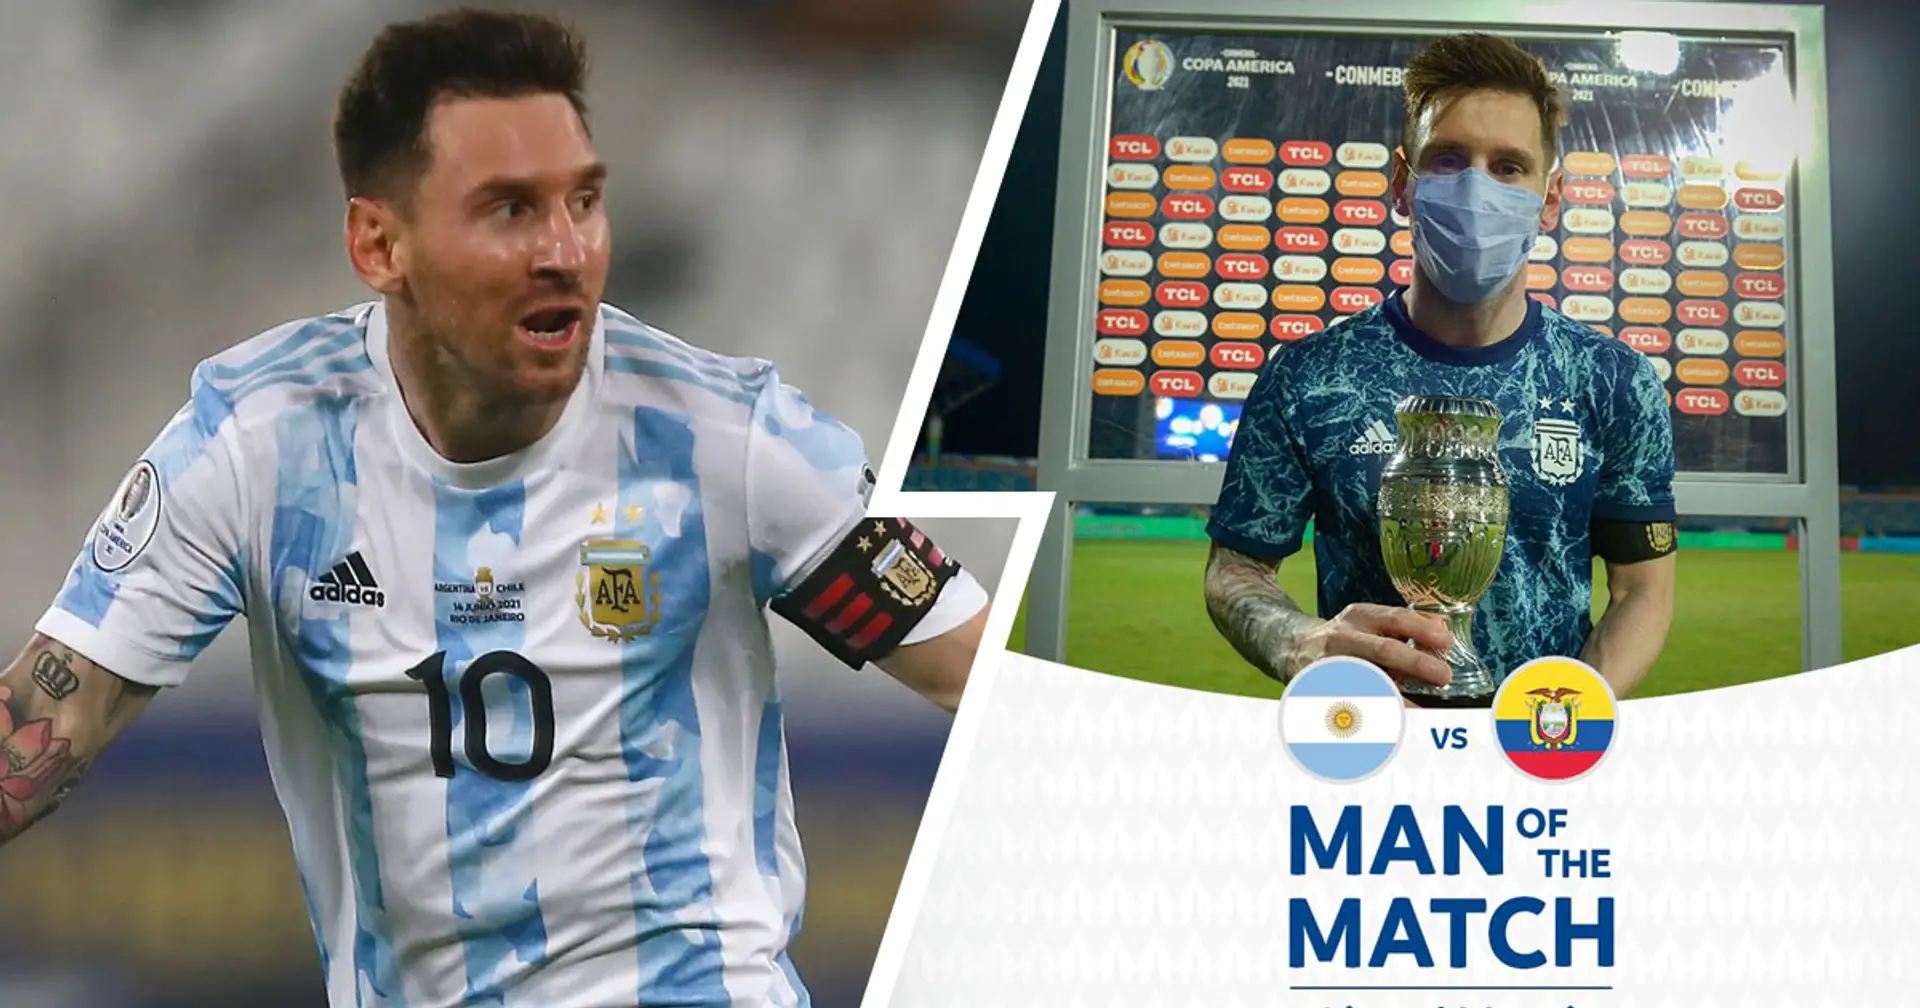 5 games, 4 Man of the Match awards: Messi's stats at 2021 Copa America are simply insane